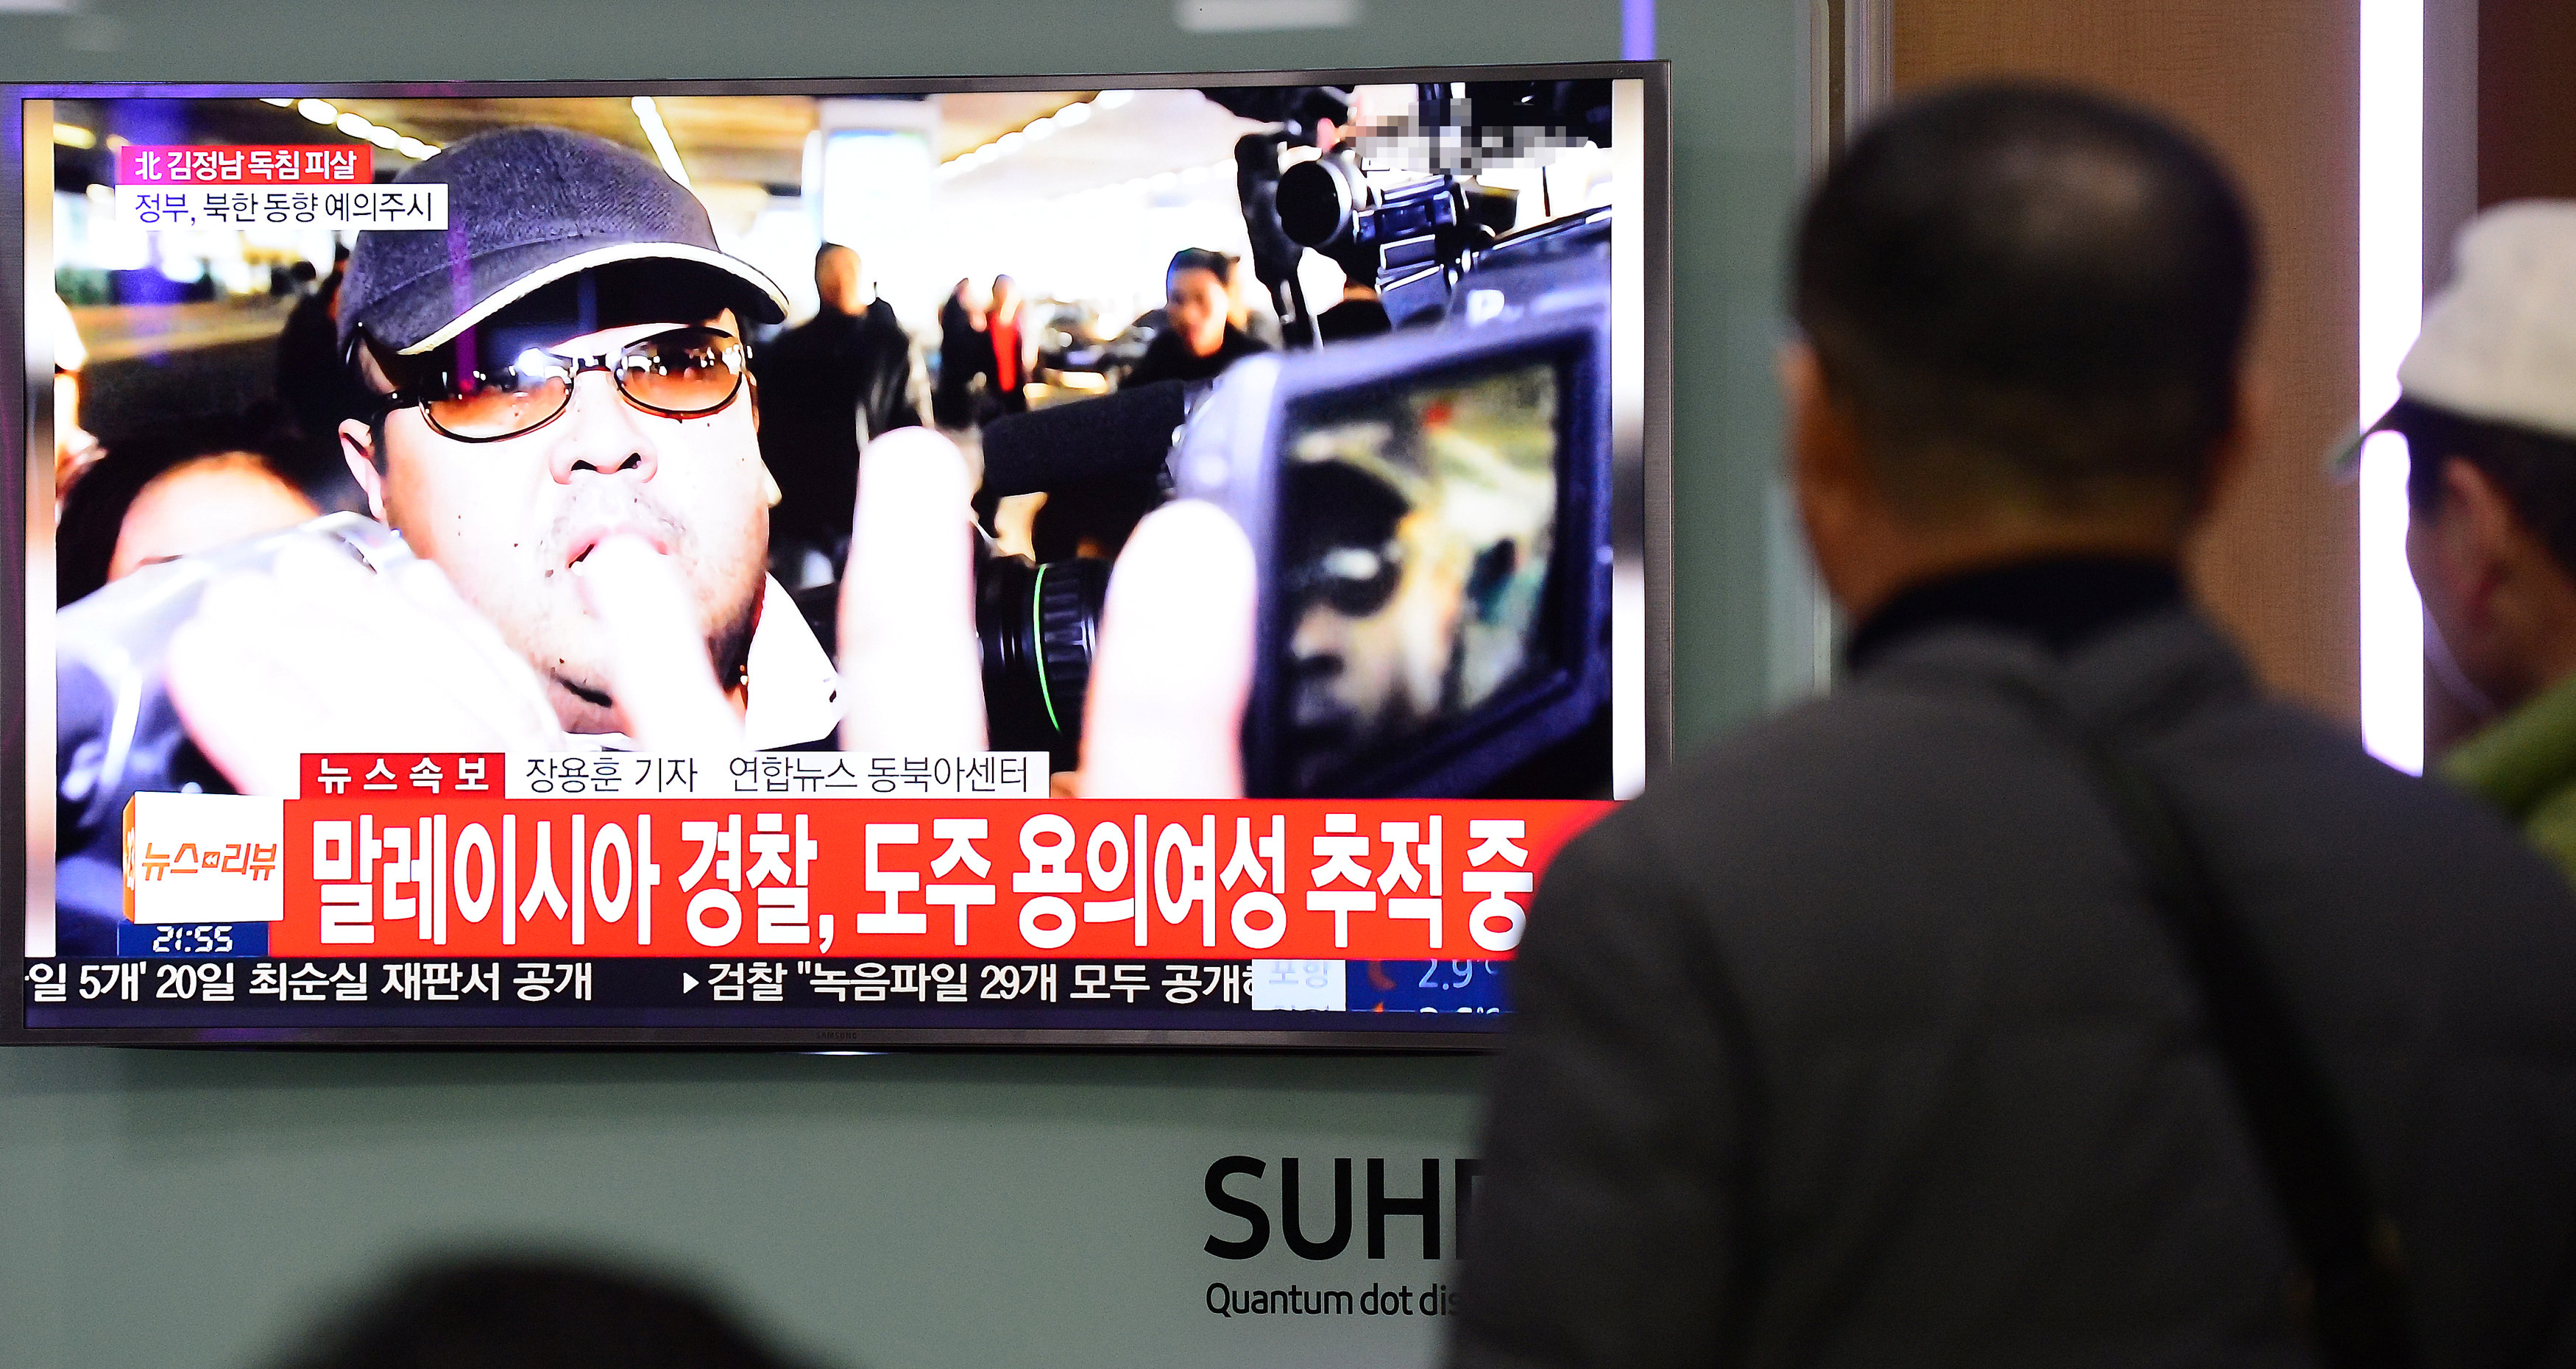 People watch a TV screen broadcasting a news report on the assassination of Kim Jong Nam at a railway station in Seoul, South Korea, February 14, 2017.  Photo: Lim Se-young / Reuters